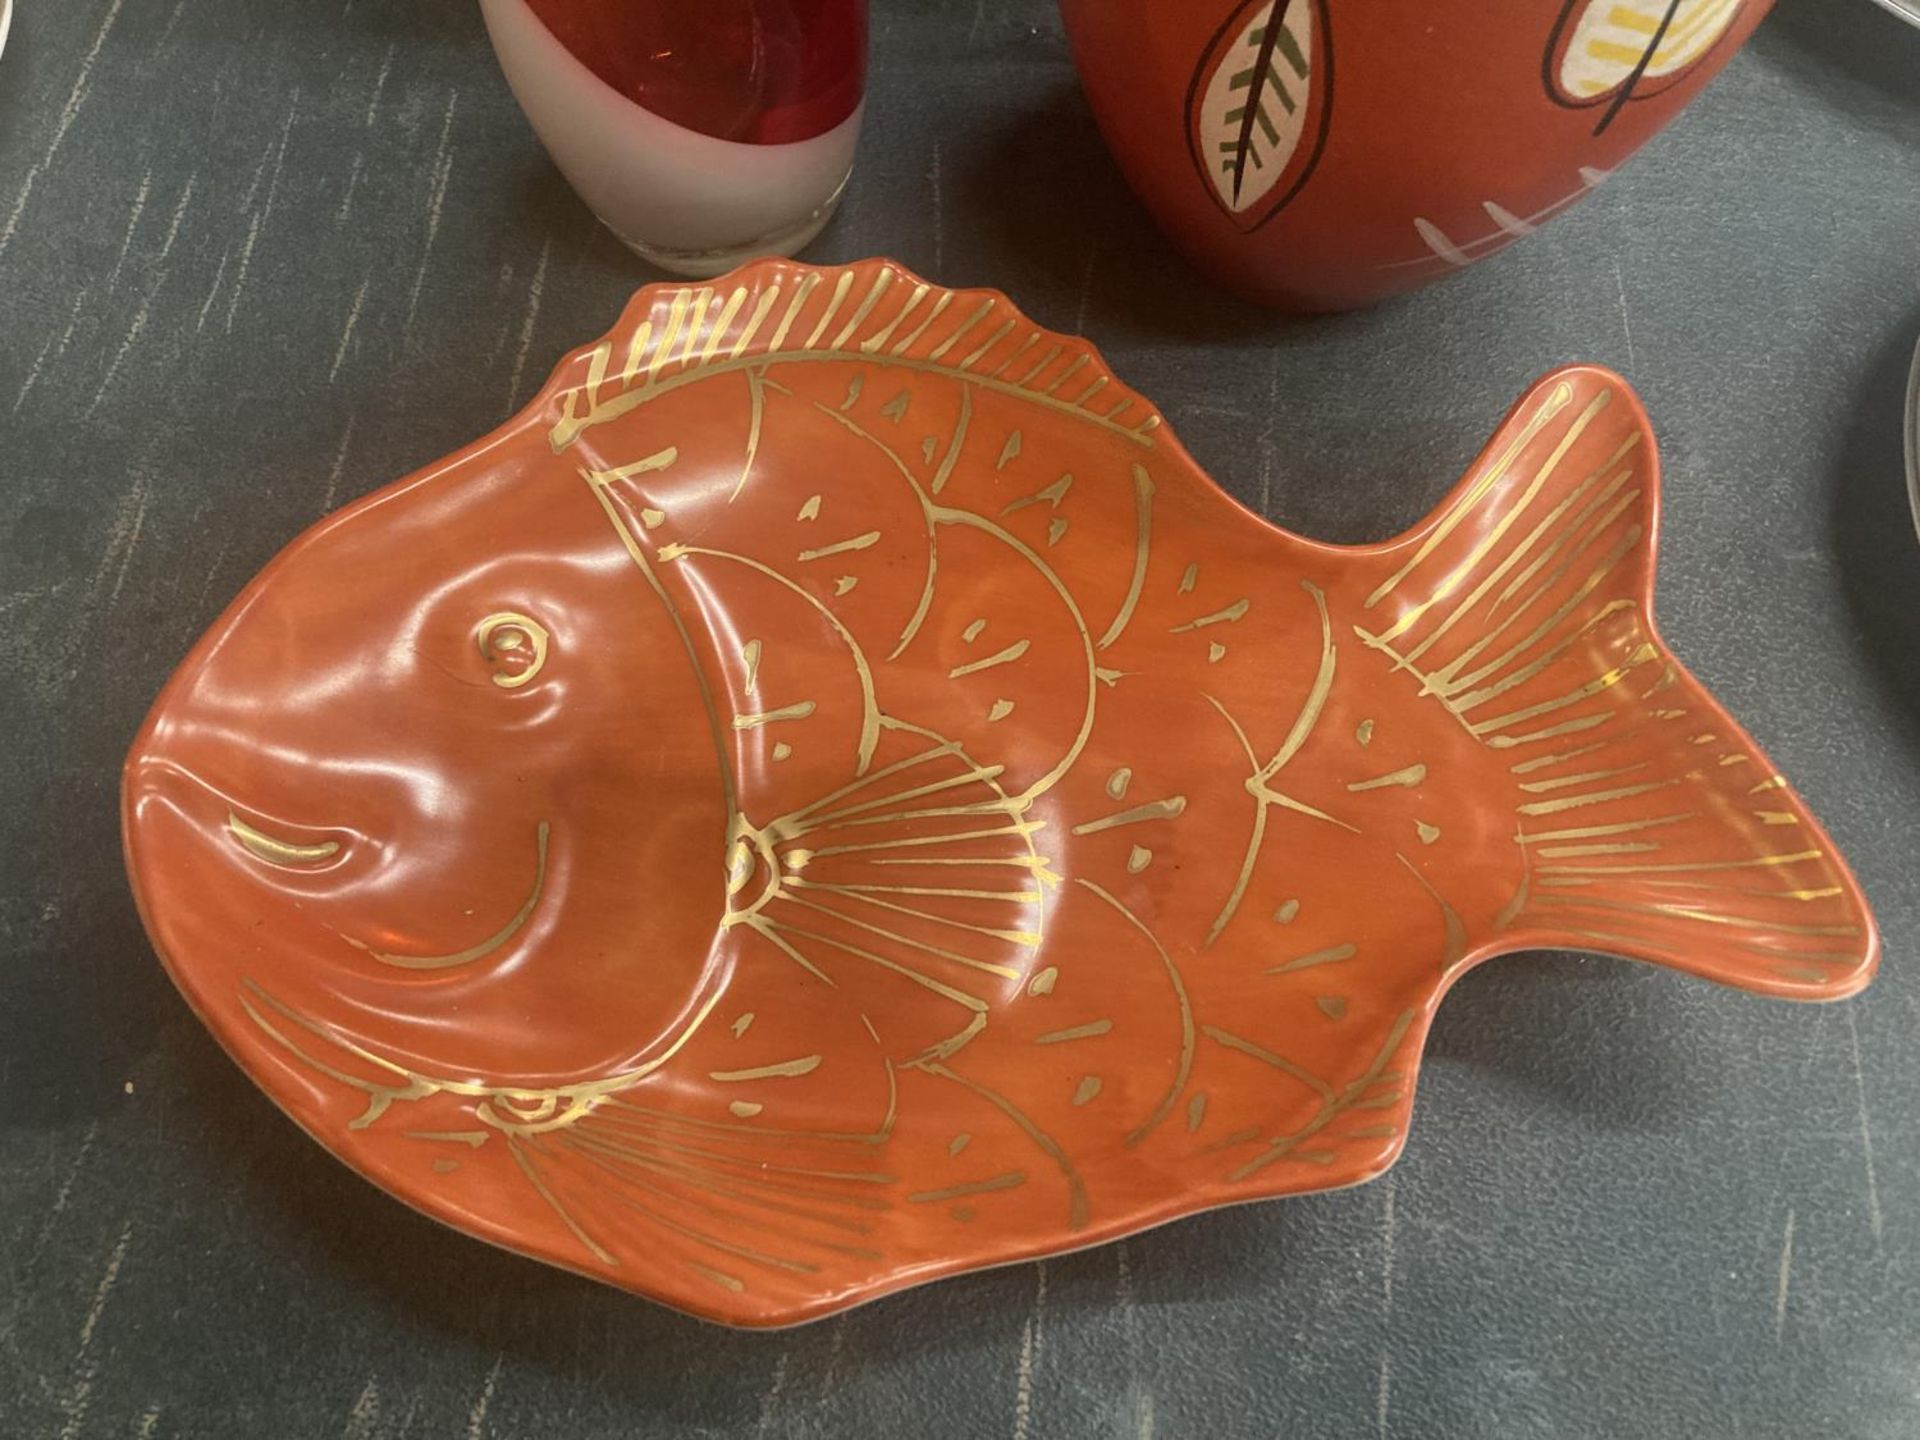 A SARN POTTERY VASE IN TERACOTTA, ORANGE 'FISH' PLATE, ORANGE AND WHITE SWIRLED ART GLASS VASE AND A - Image 2 of 6